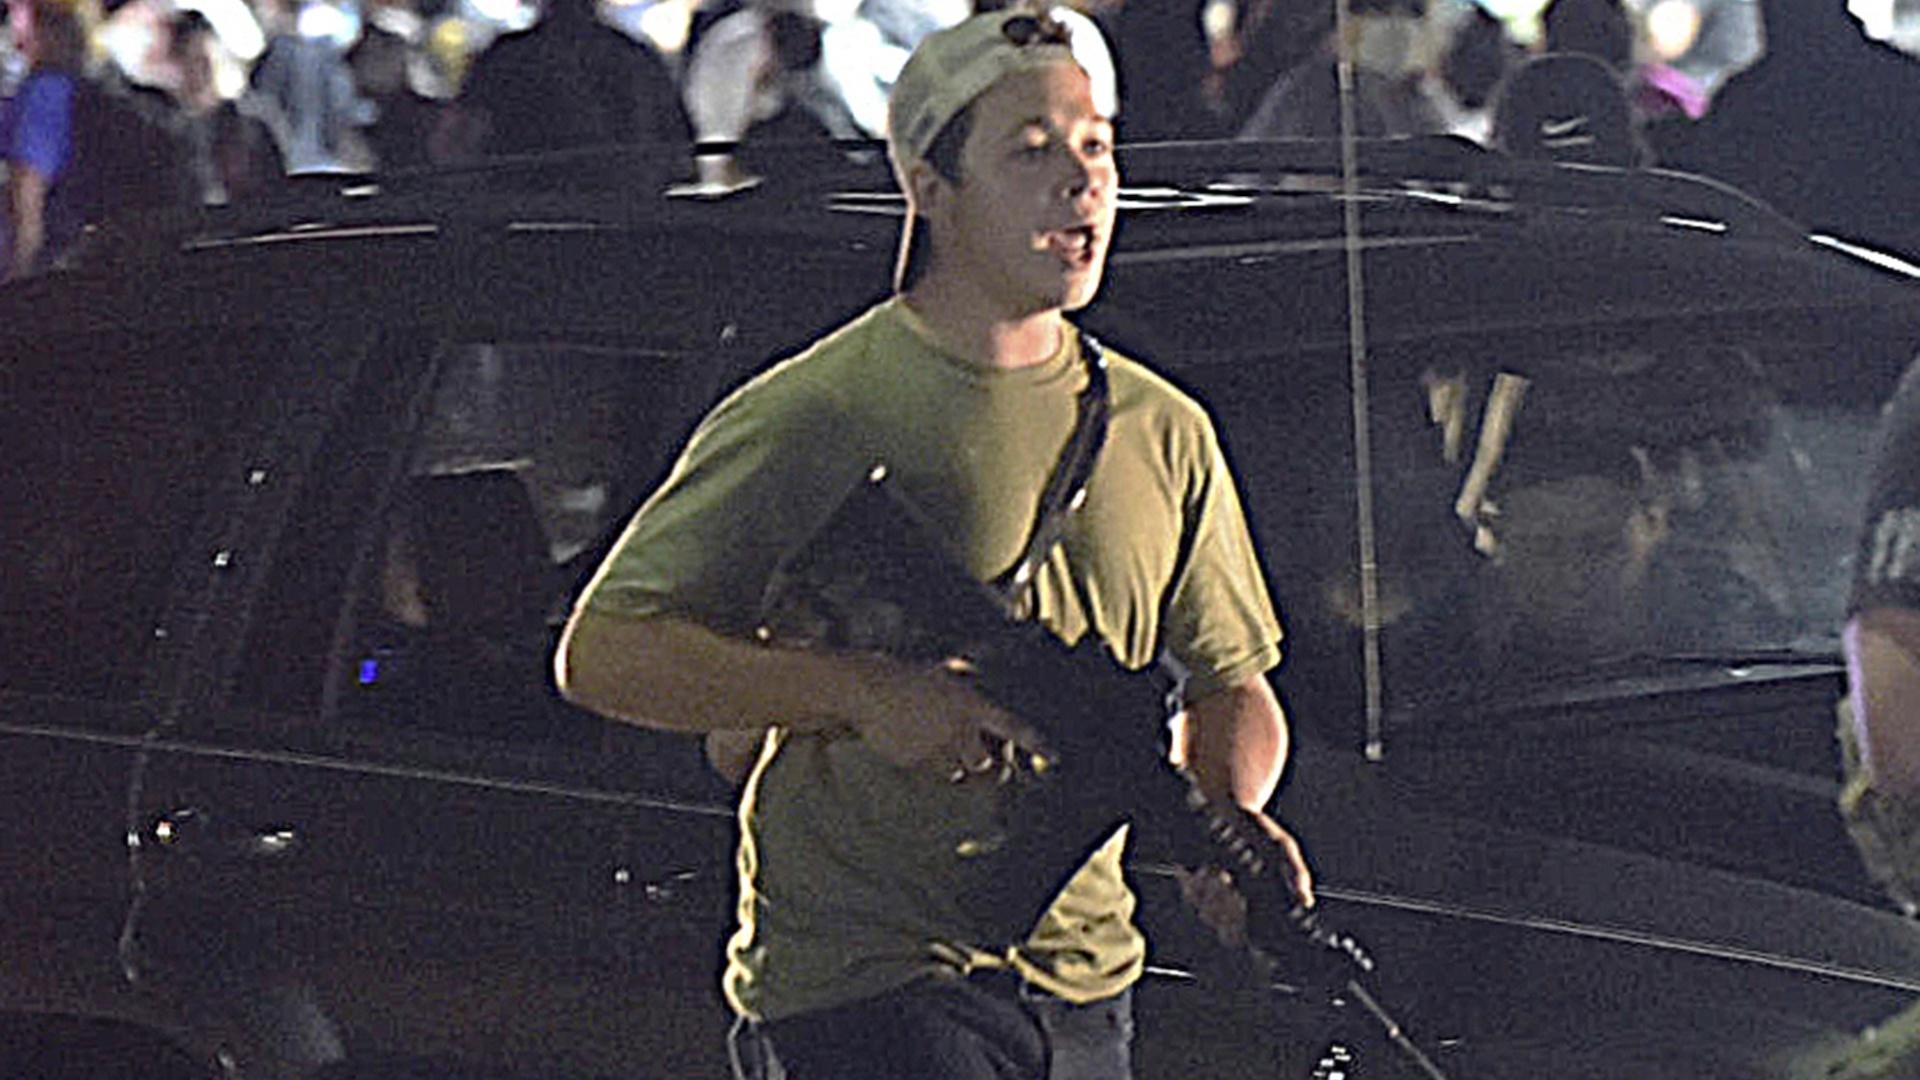 In this Tuesday, Aug. 25, 2020 file photo, Kyle Rittenhouse carries a weapon as he walks along Sheridan Road in Kenosha, Wis., during a night of unrest following the weekend police shooting of Jacob Blake. (Adam Rogan/The Journal Times via AP, File)